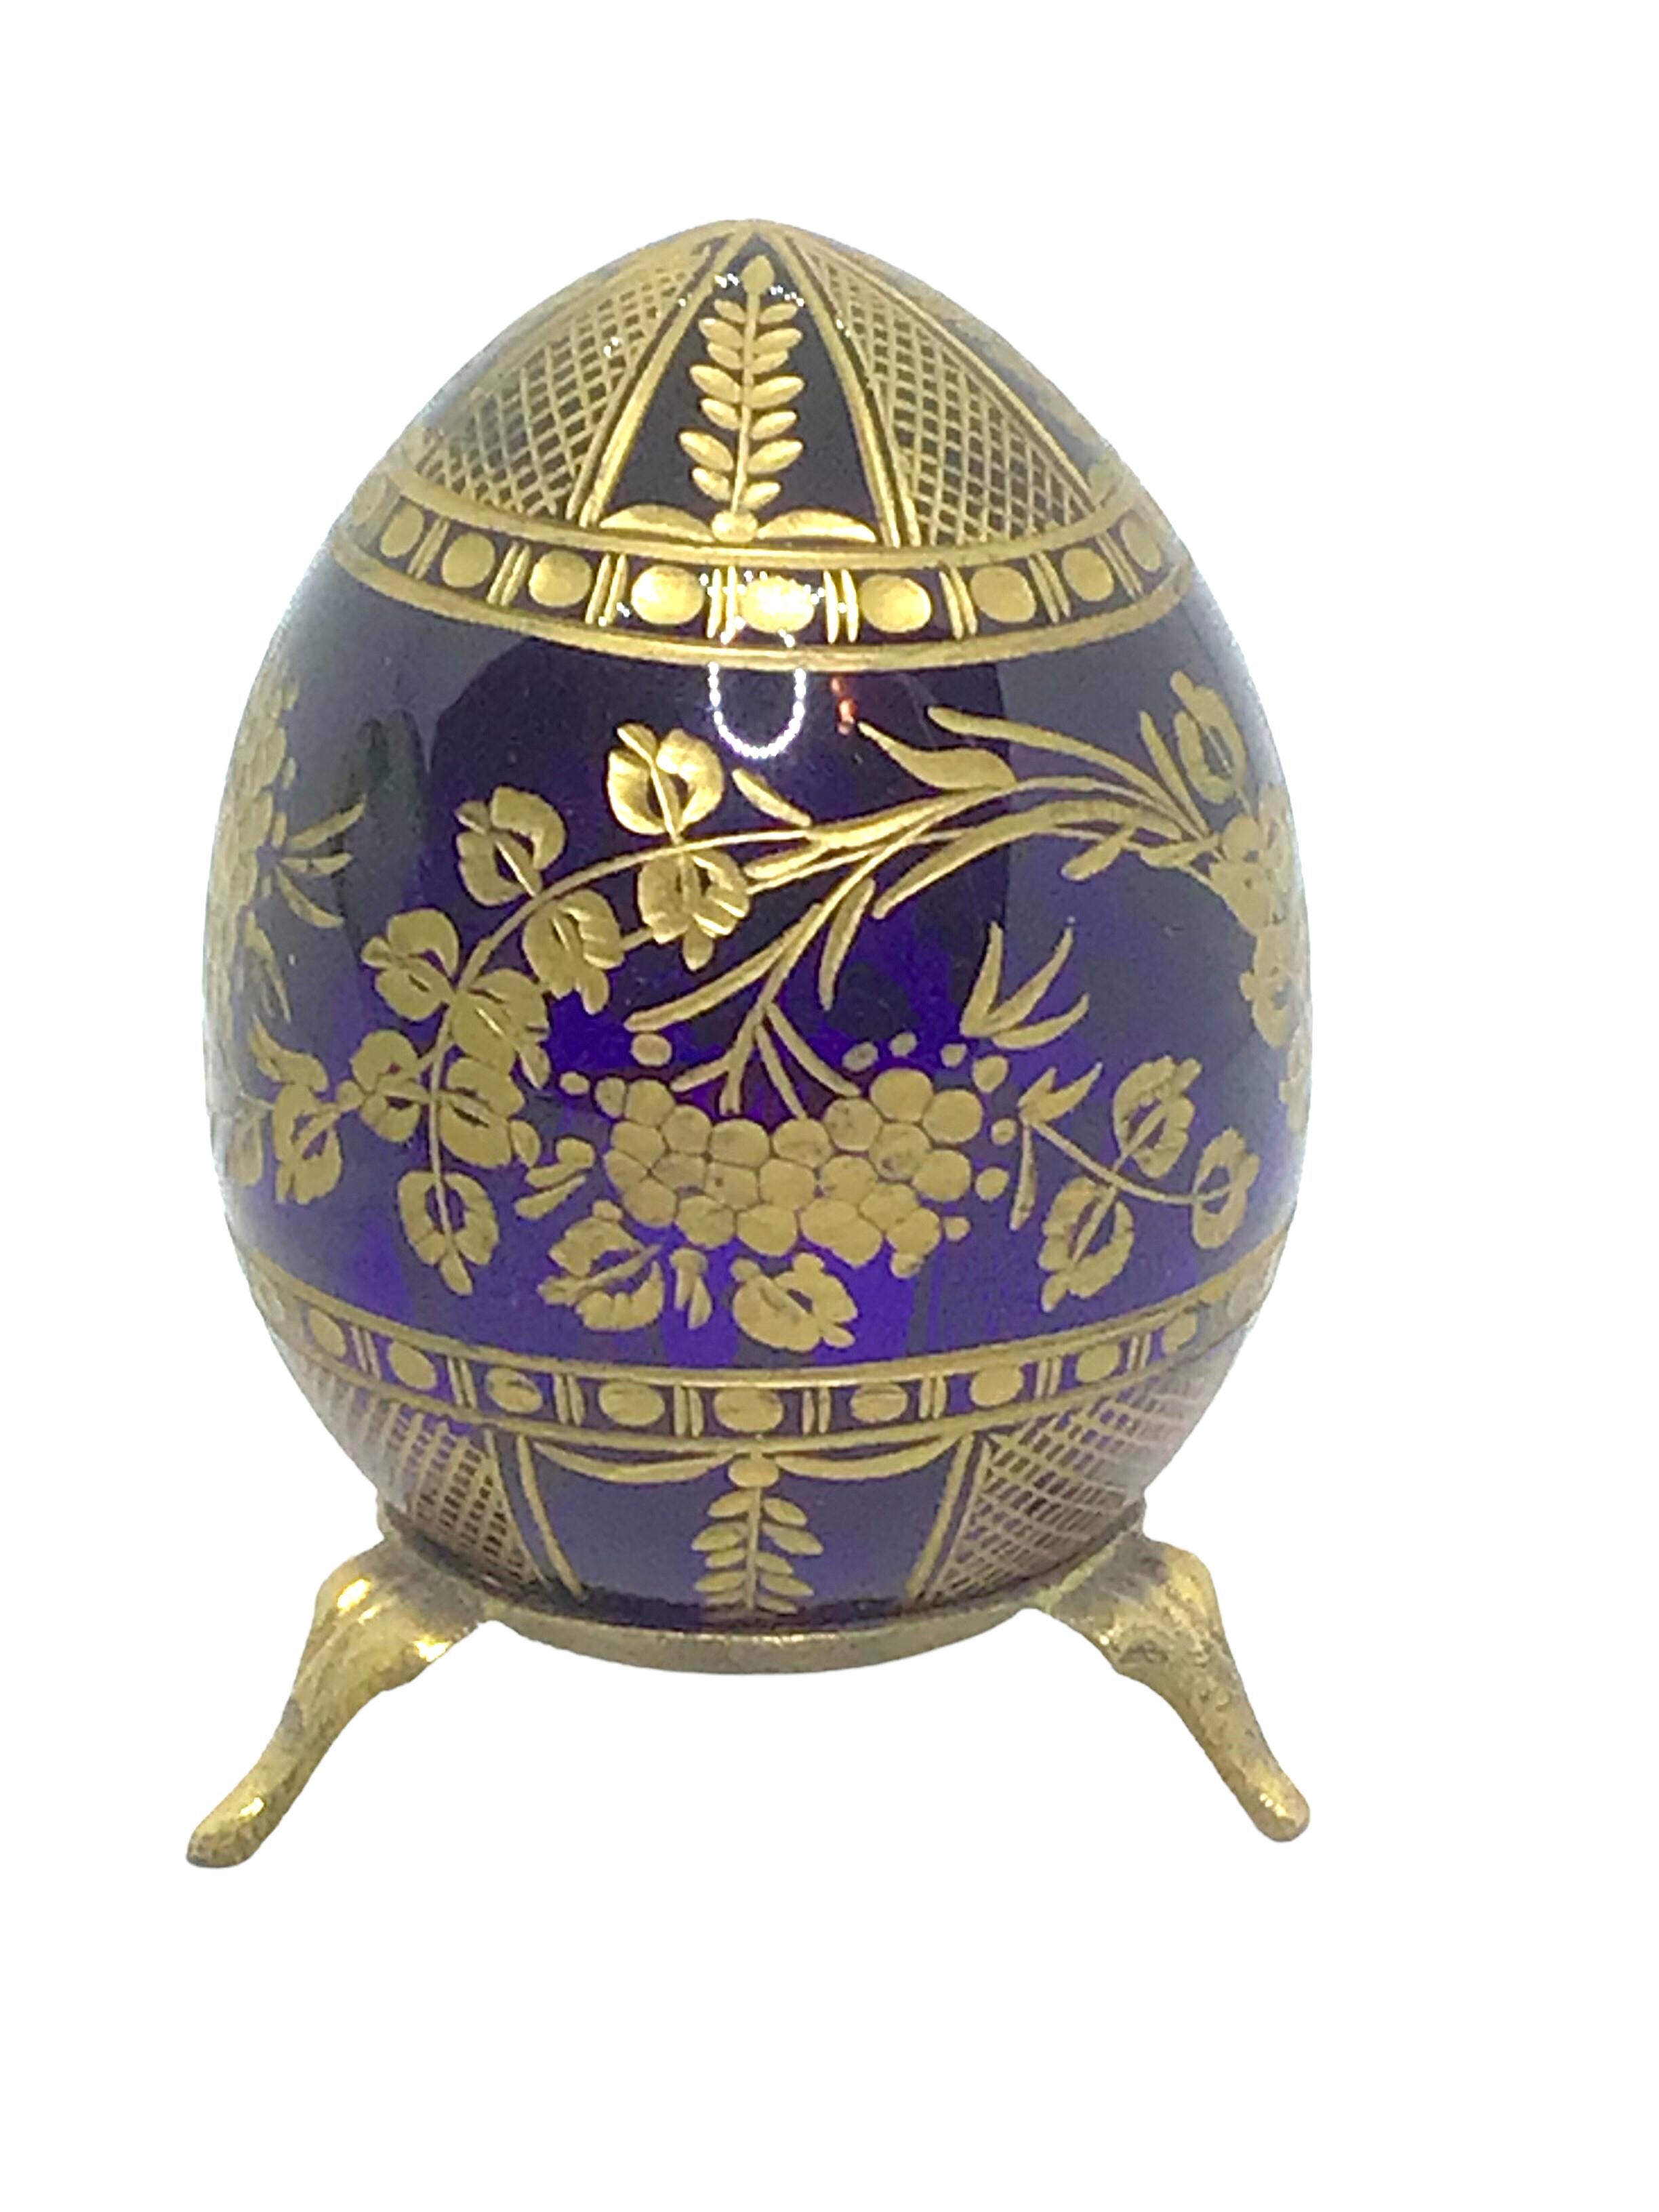 Vintage Faberge Russia style glass egg with etched decorations. Reminiscent of eggs from St. Petersburg. Measures: 2.13